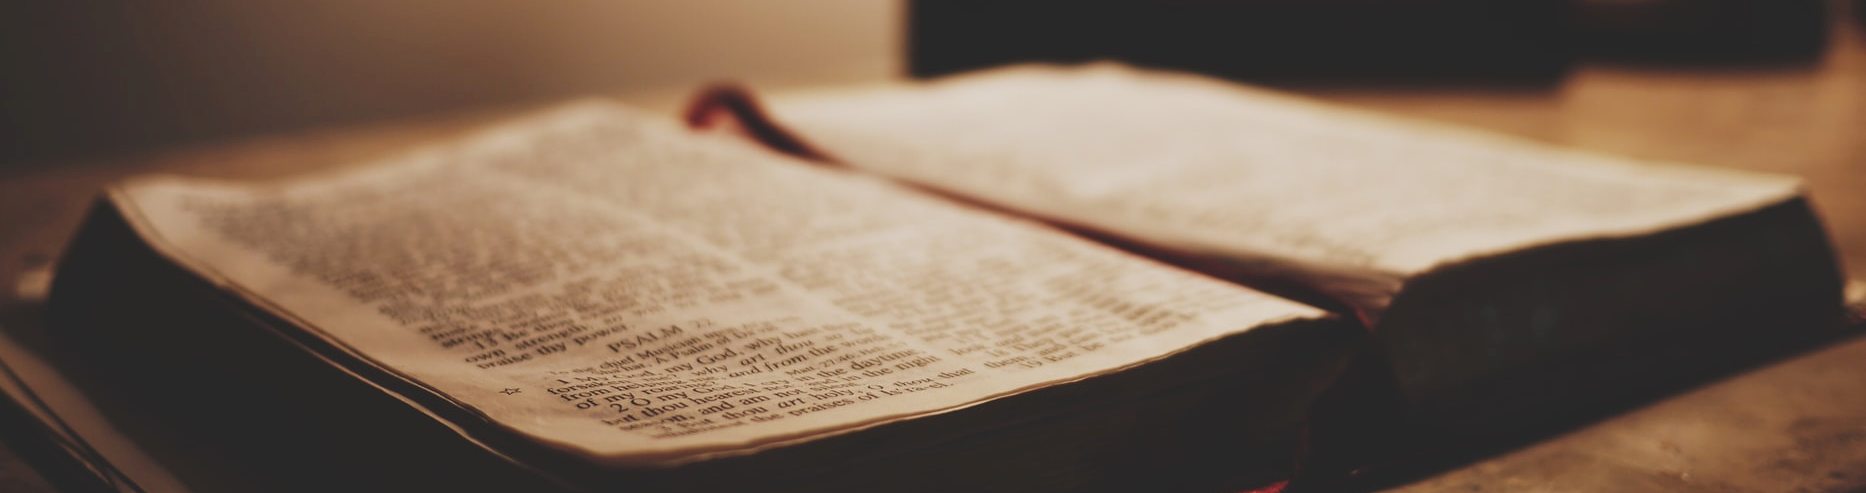 photo of a bible on a desk